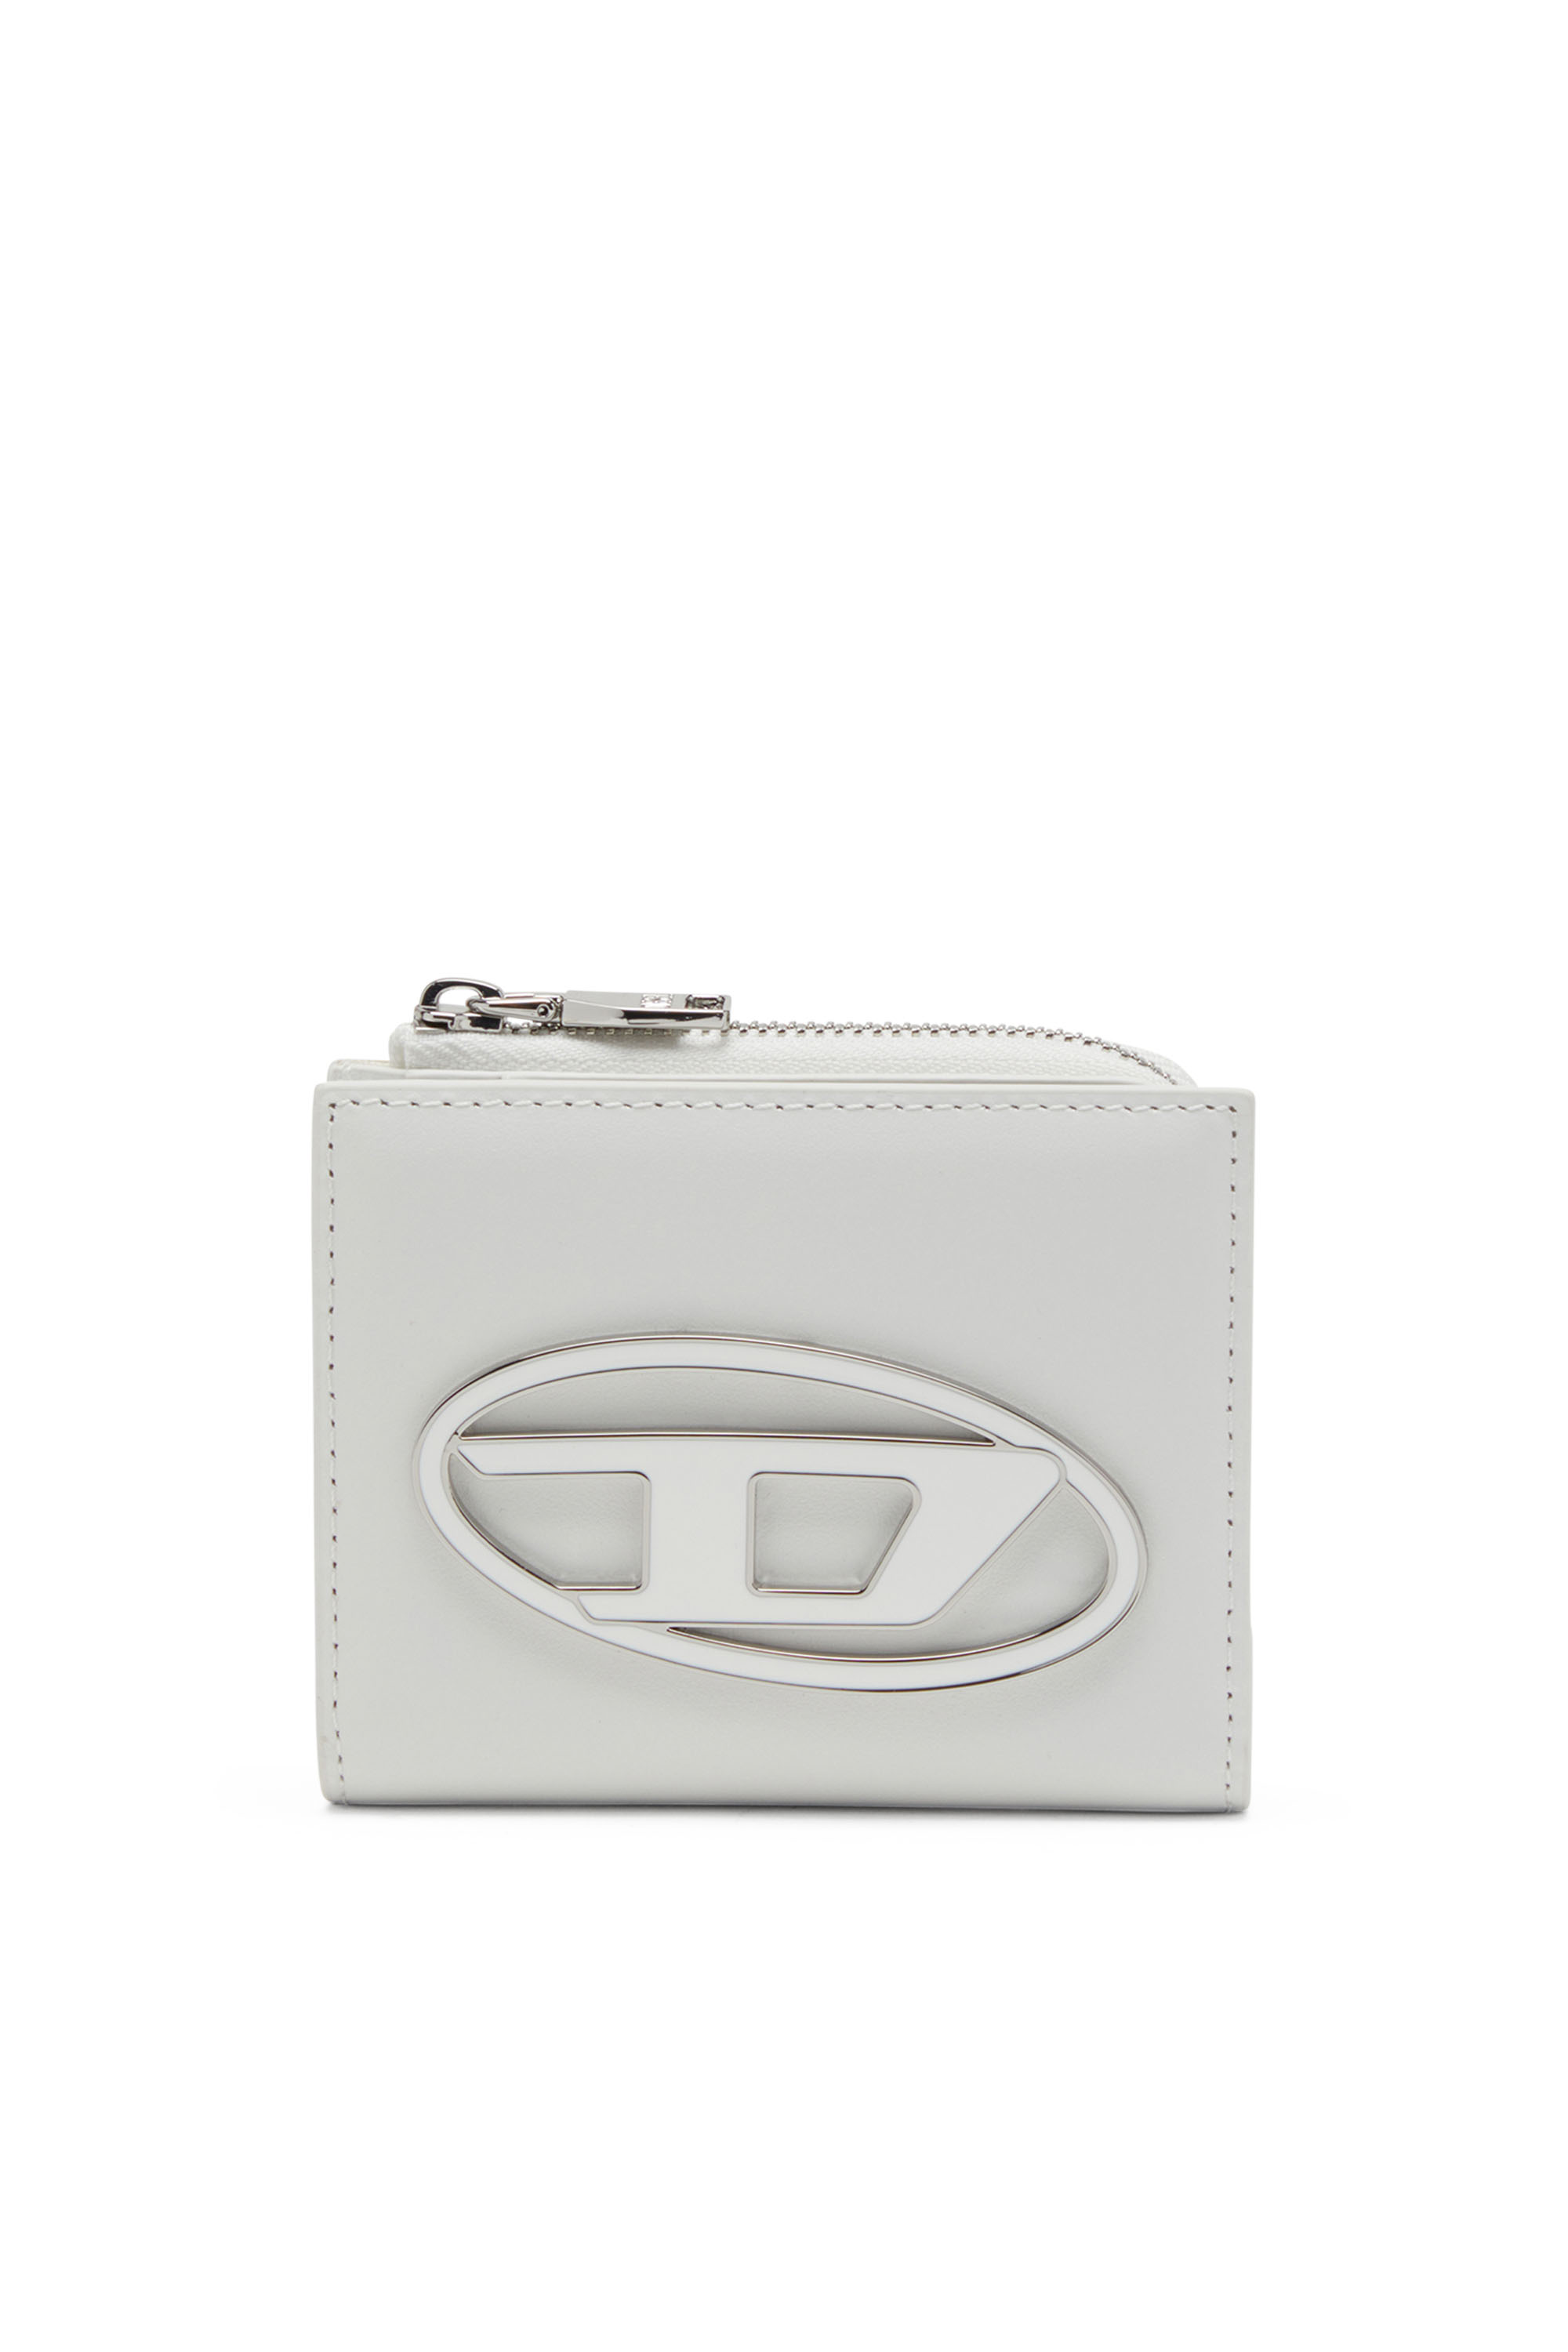 Diesel - 1DR CARD HOLDER ZIP L, Woman Bi-fold card holder in nappa leather in White - Image 1